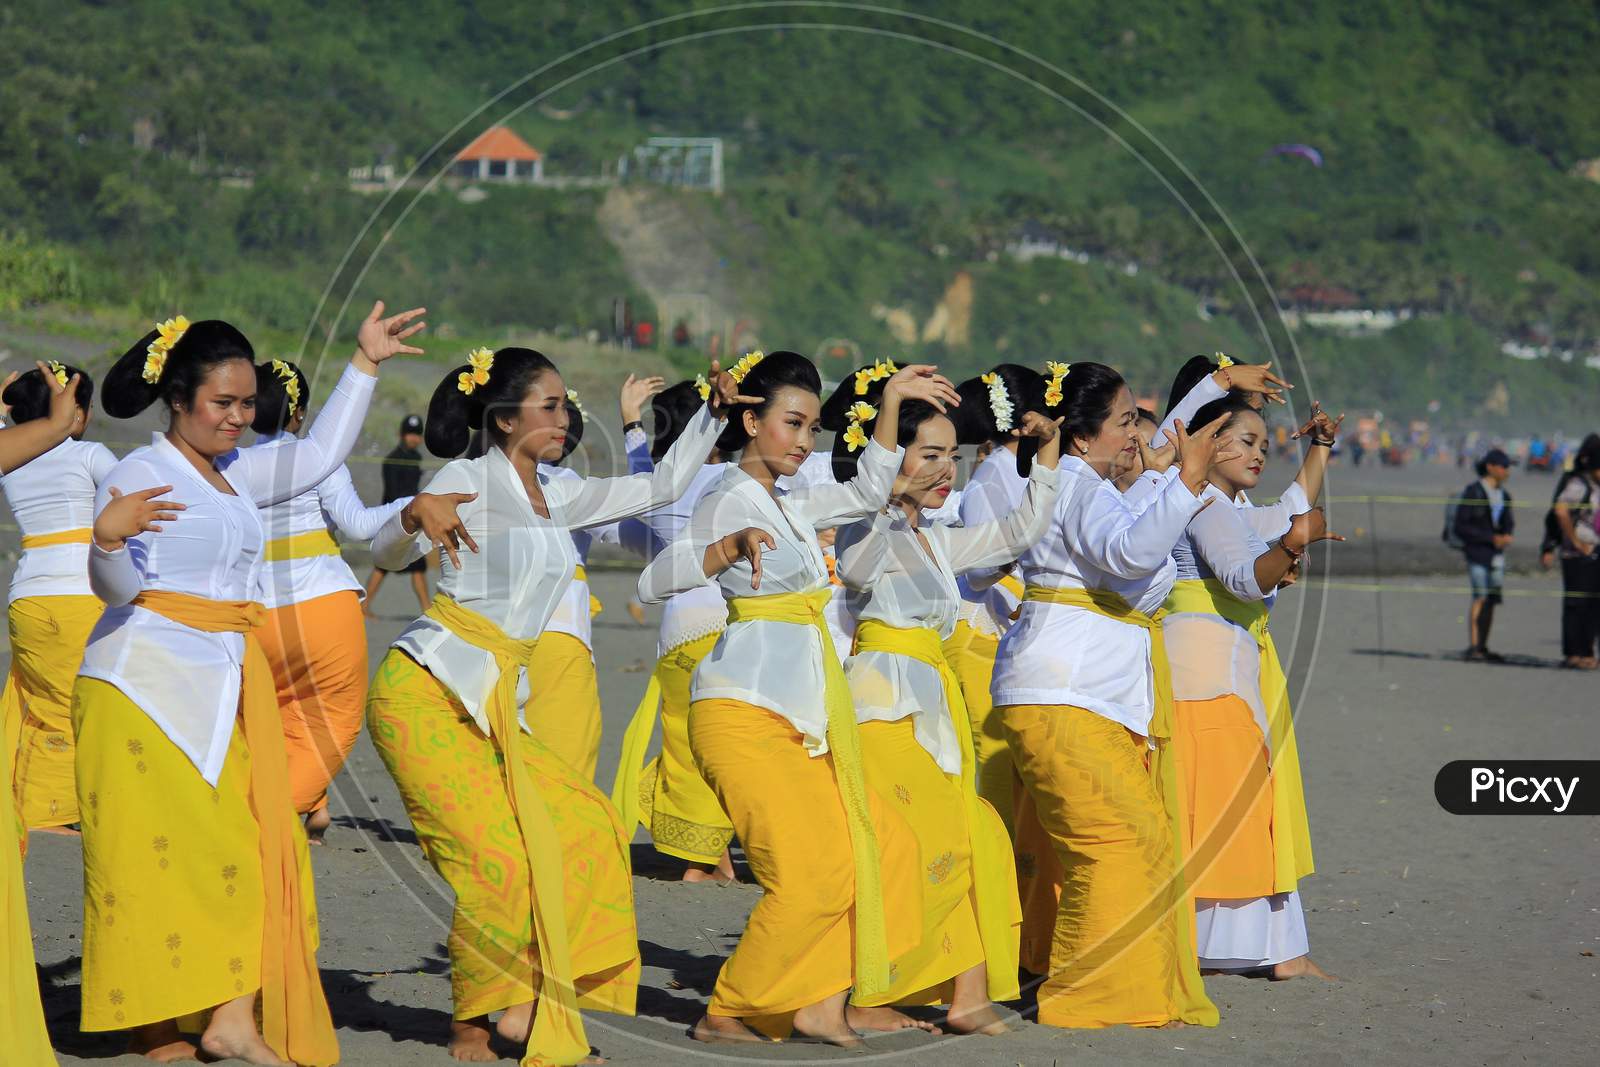 Hindus Rejang danced at the Melasti ceremony before Silent Day